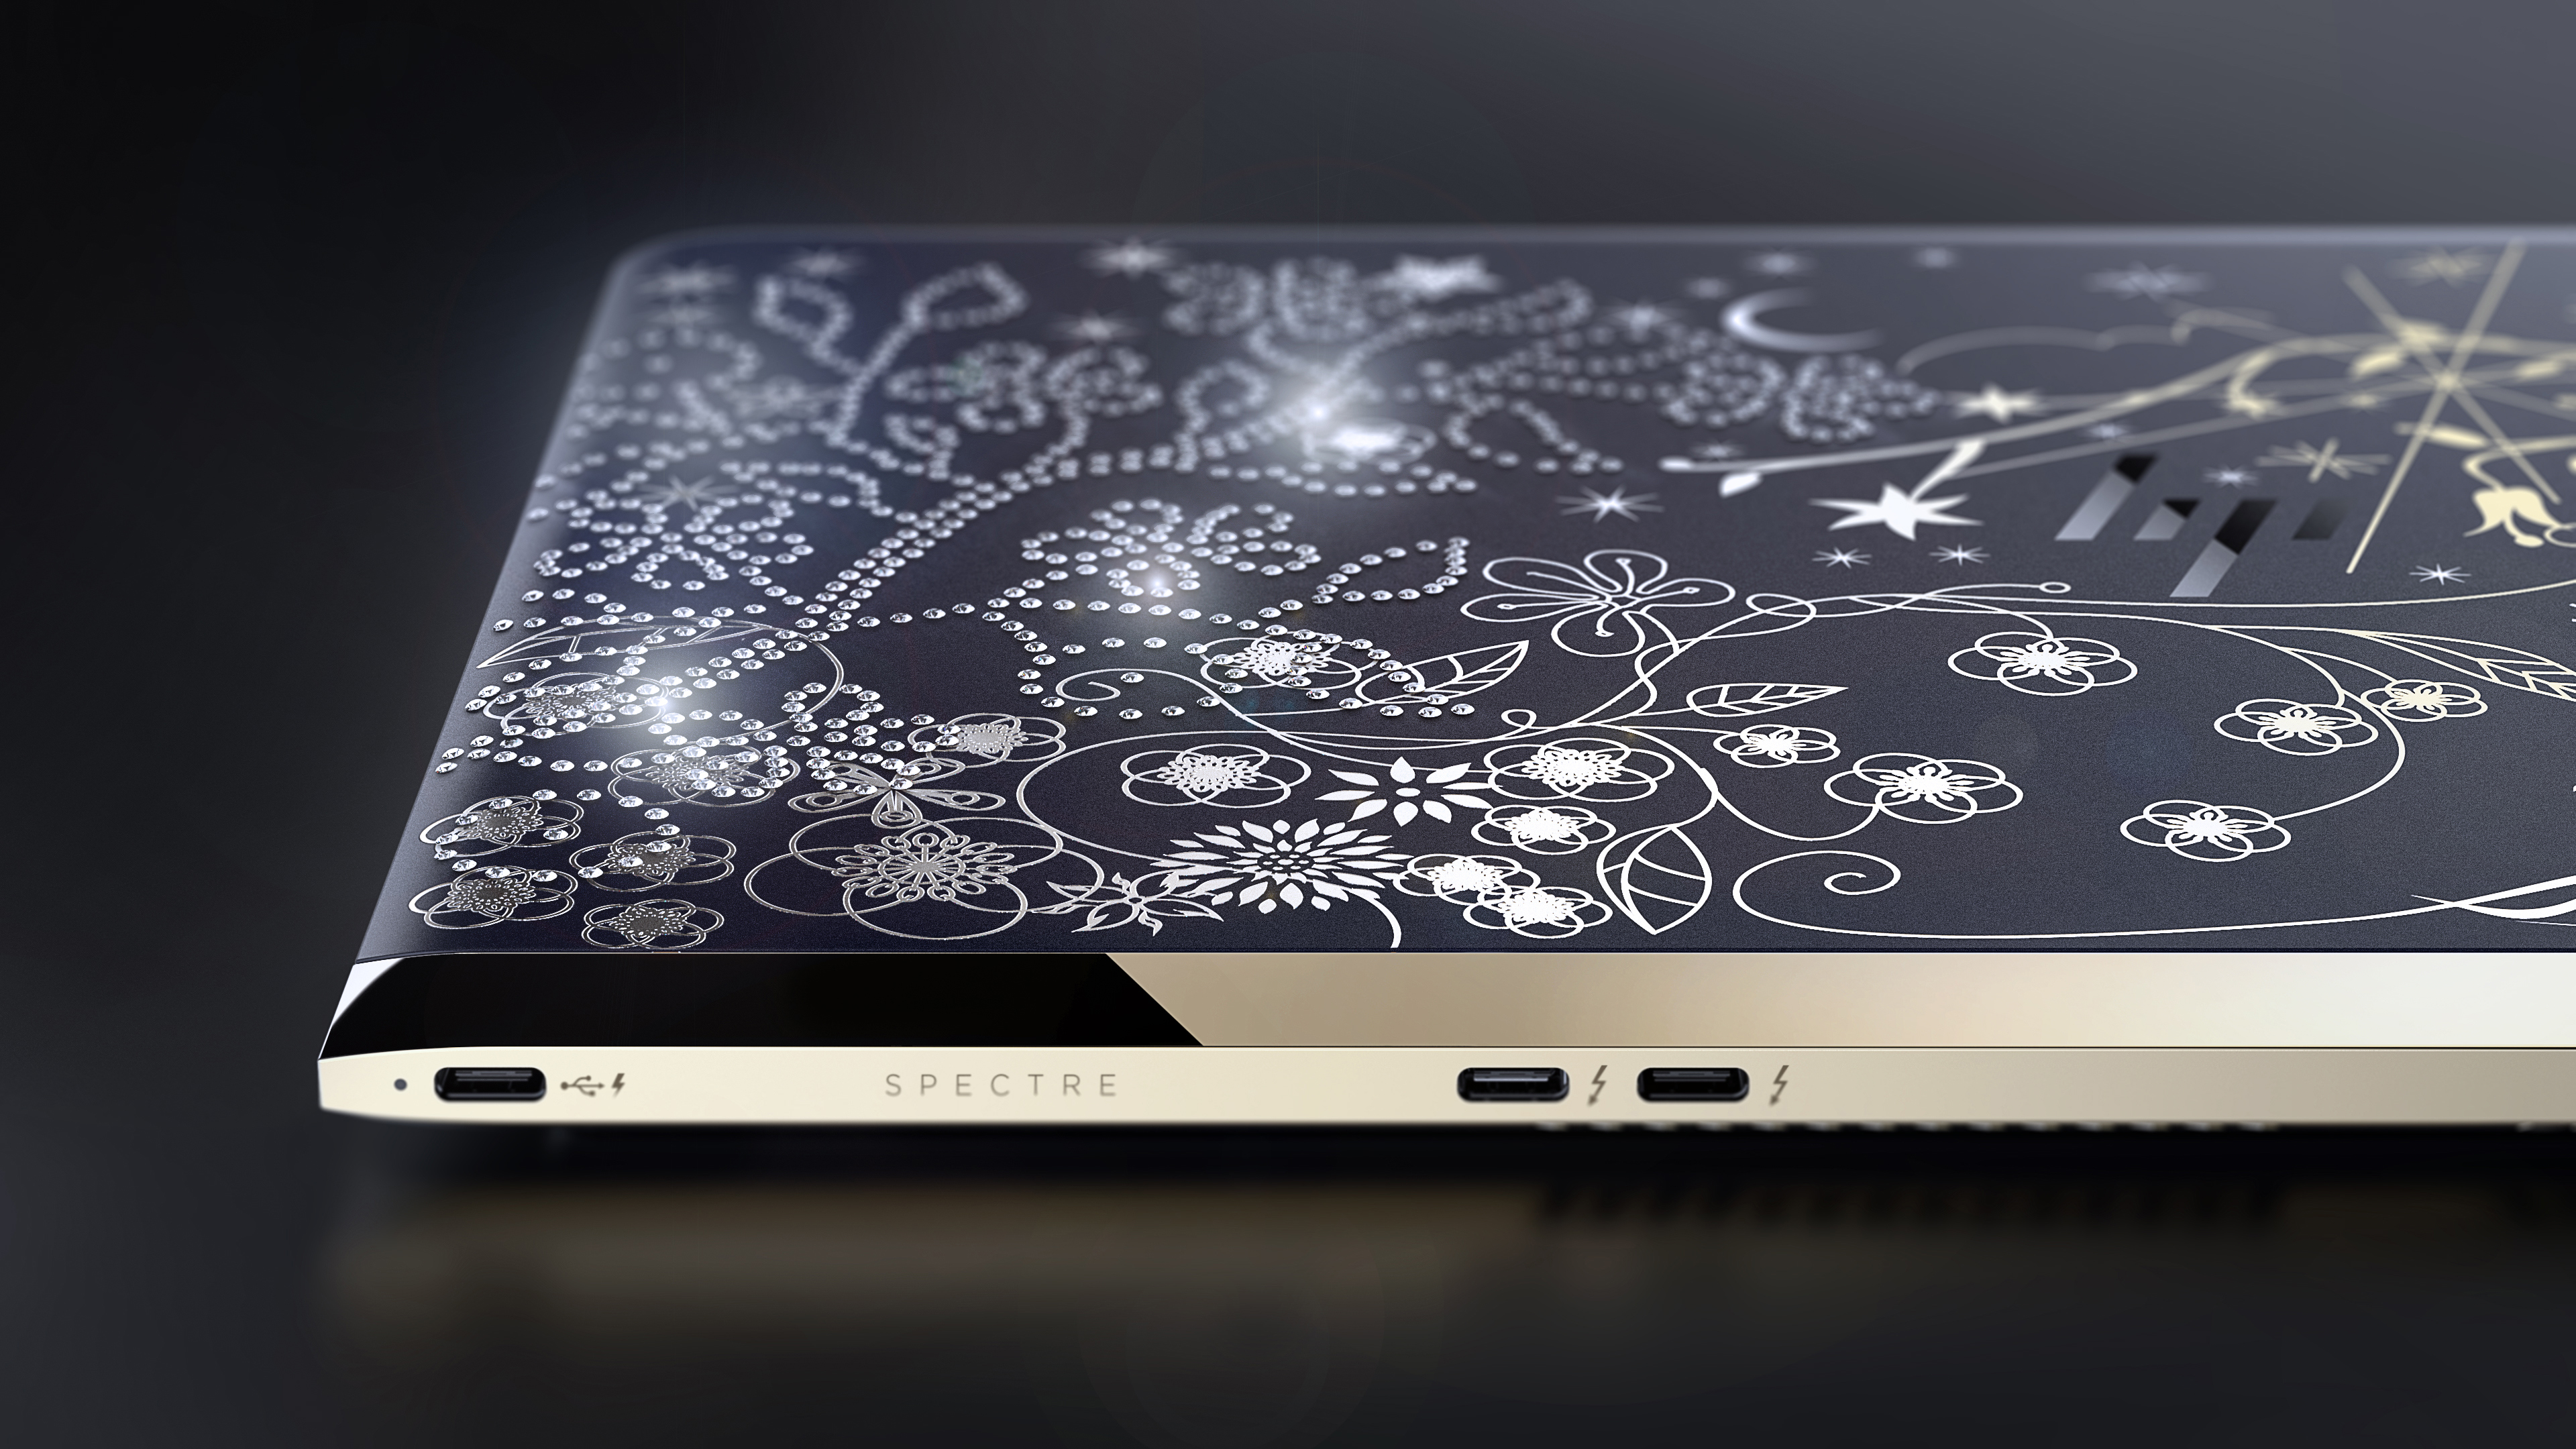 HP Spectre - Limited Edition by Tord Boontje